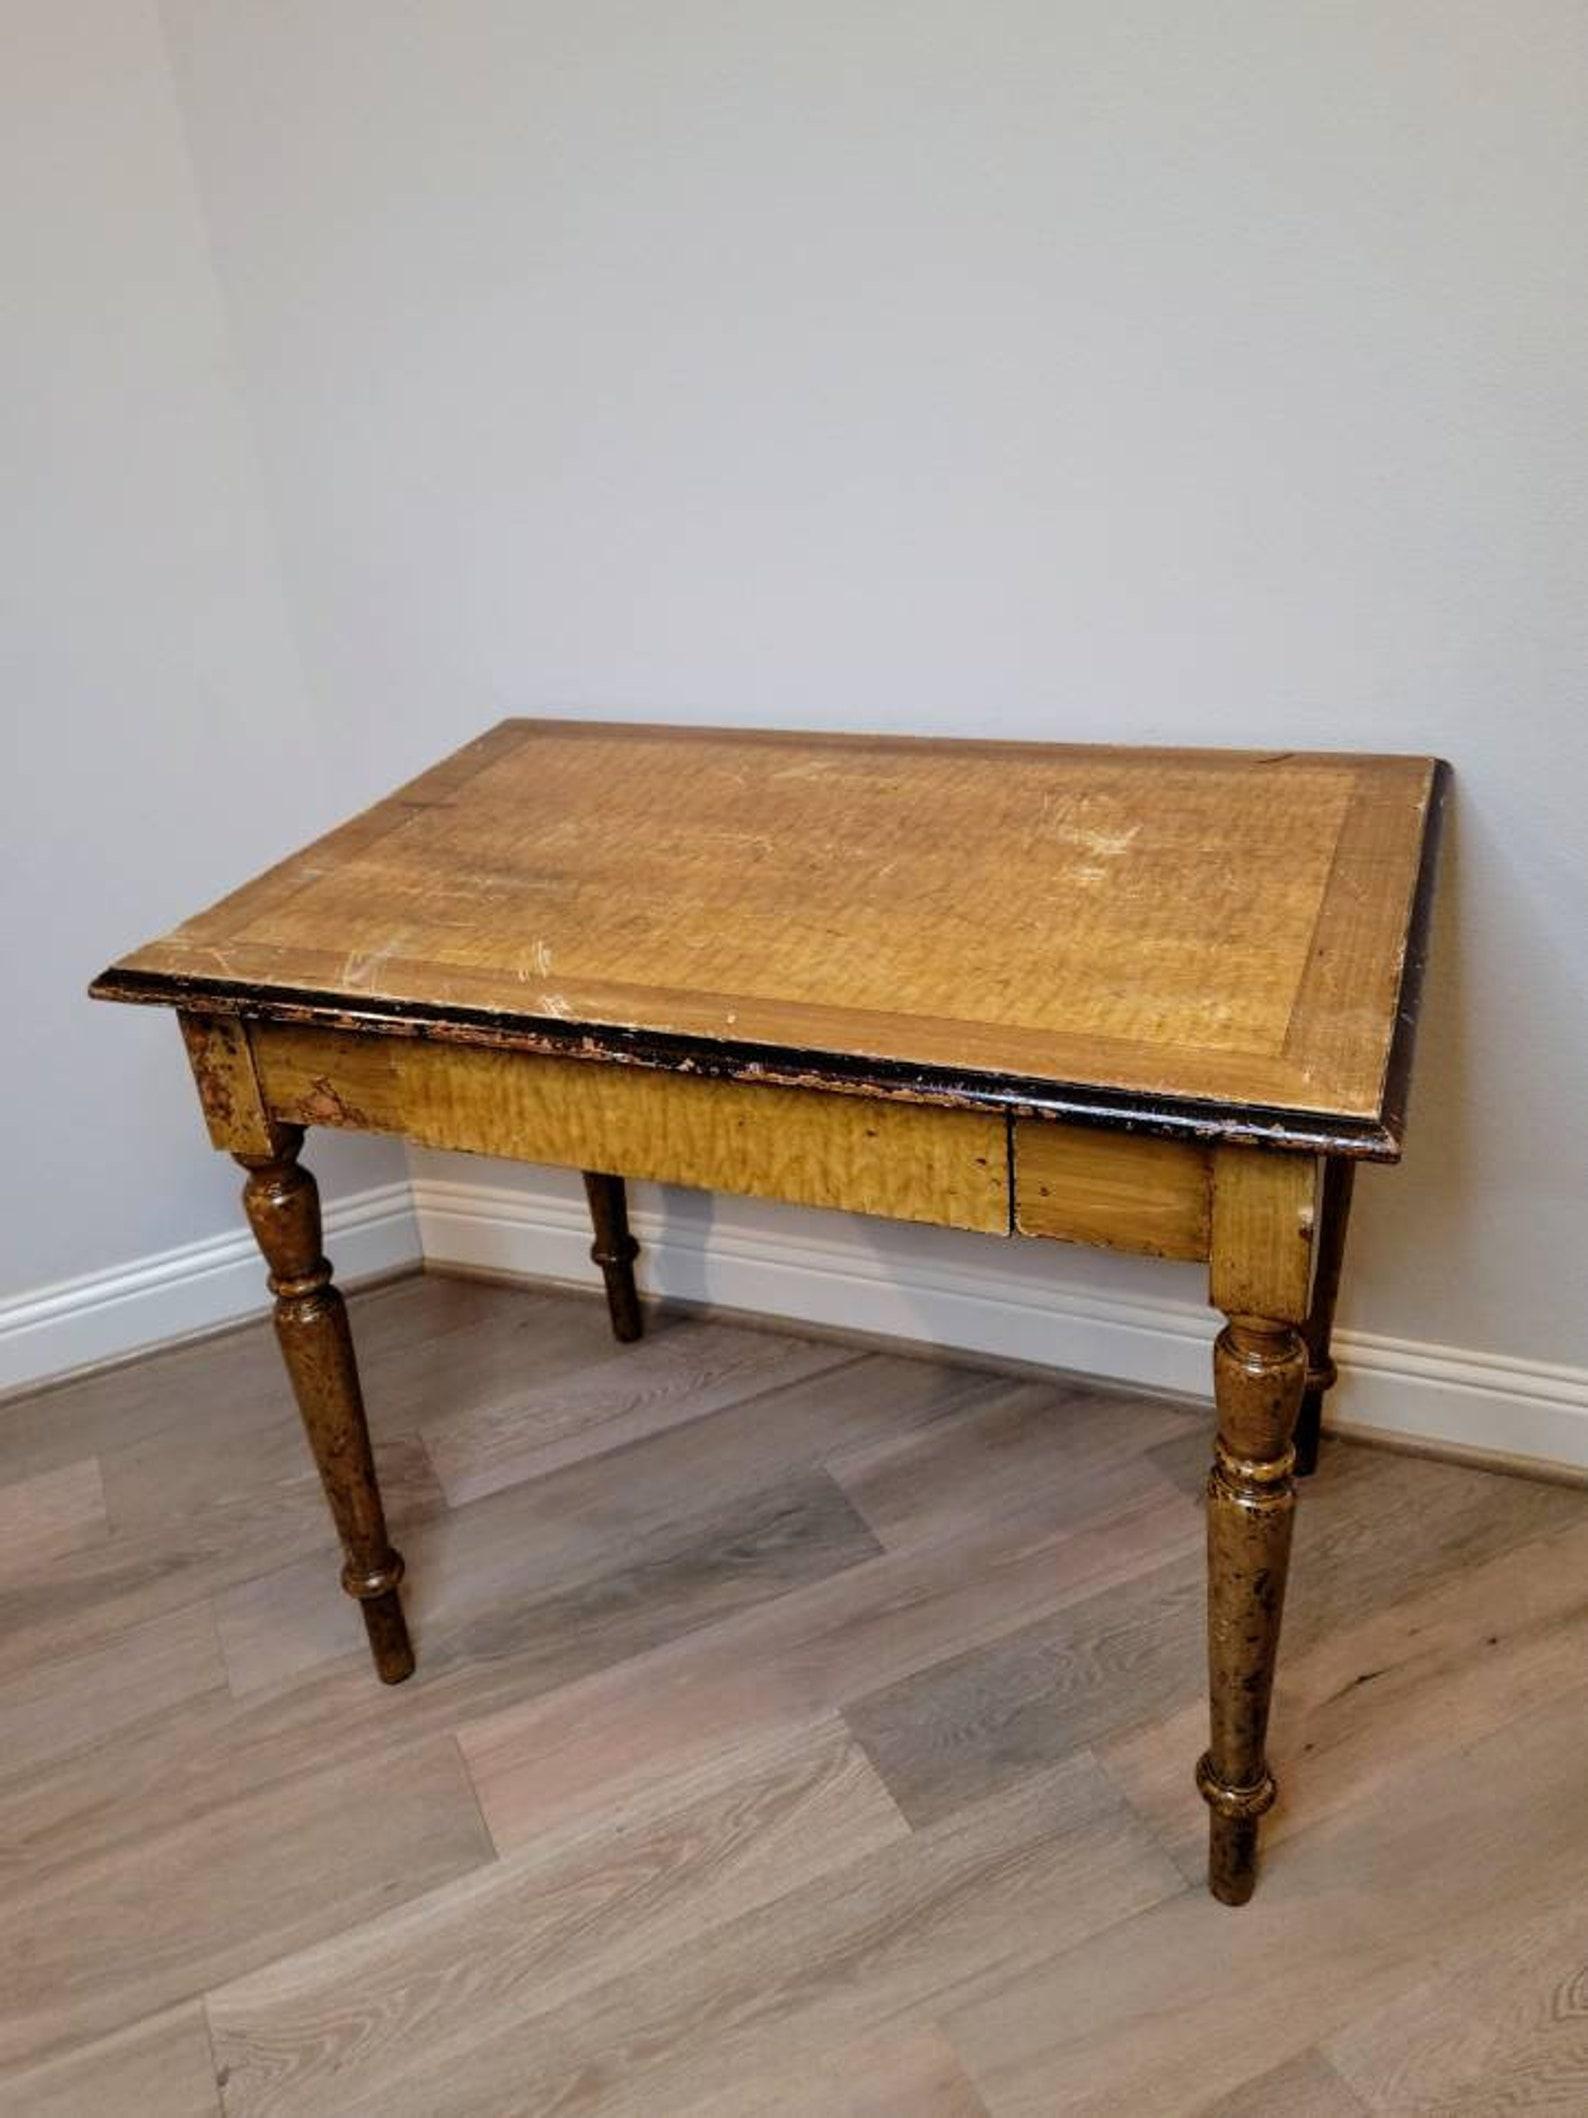 A heavily worn and distressed hand painted yellow faux wood grain farmhouse kitchen work table. 

Hand-crafted of solid wood, richly detailed original antique character including faux cross-banded faux graining framed highly figured quilted maple